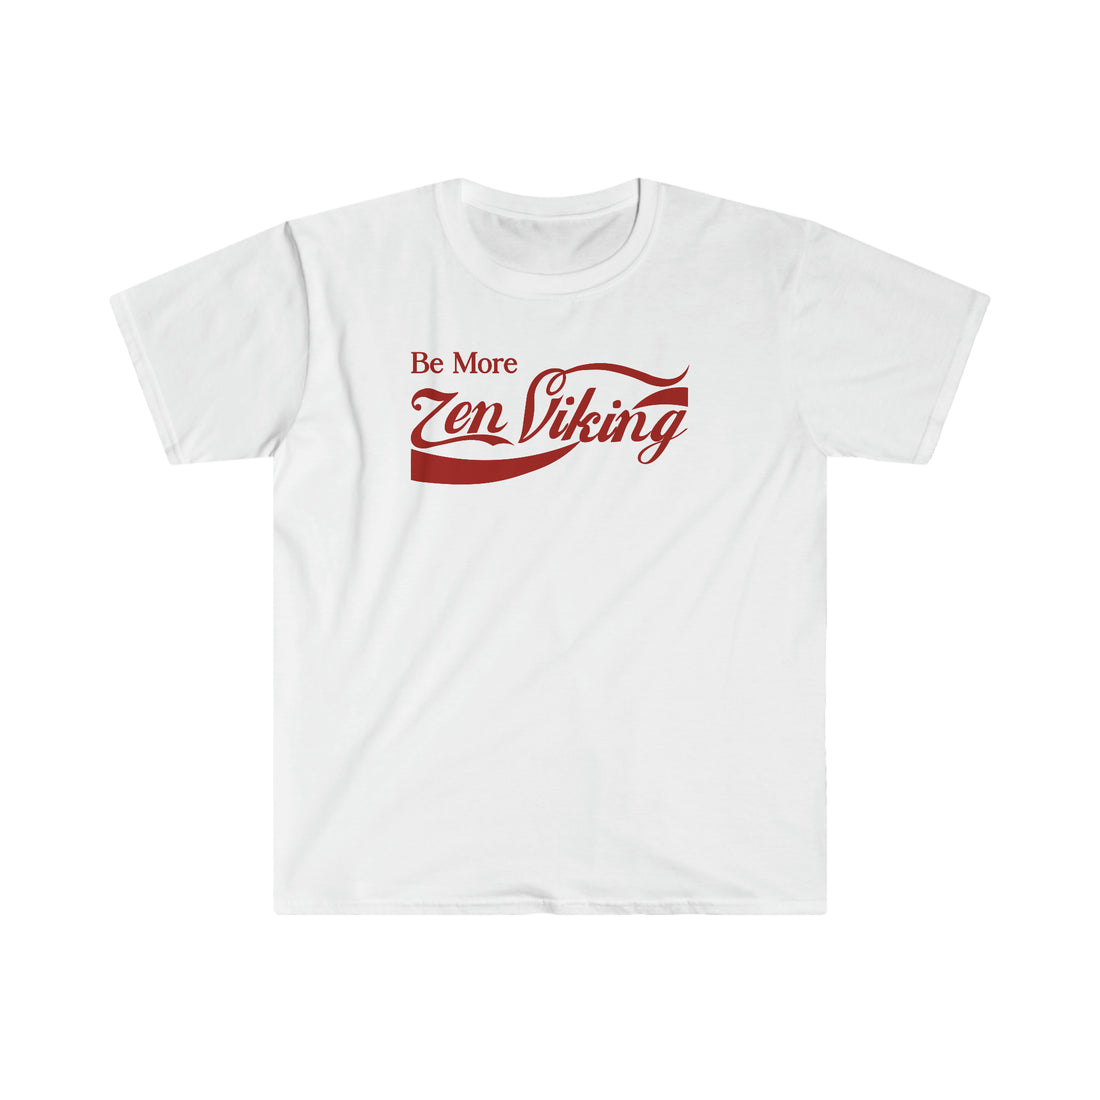 Be More ZV Red Label T-Shirt - THE ZEN VIKING